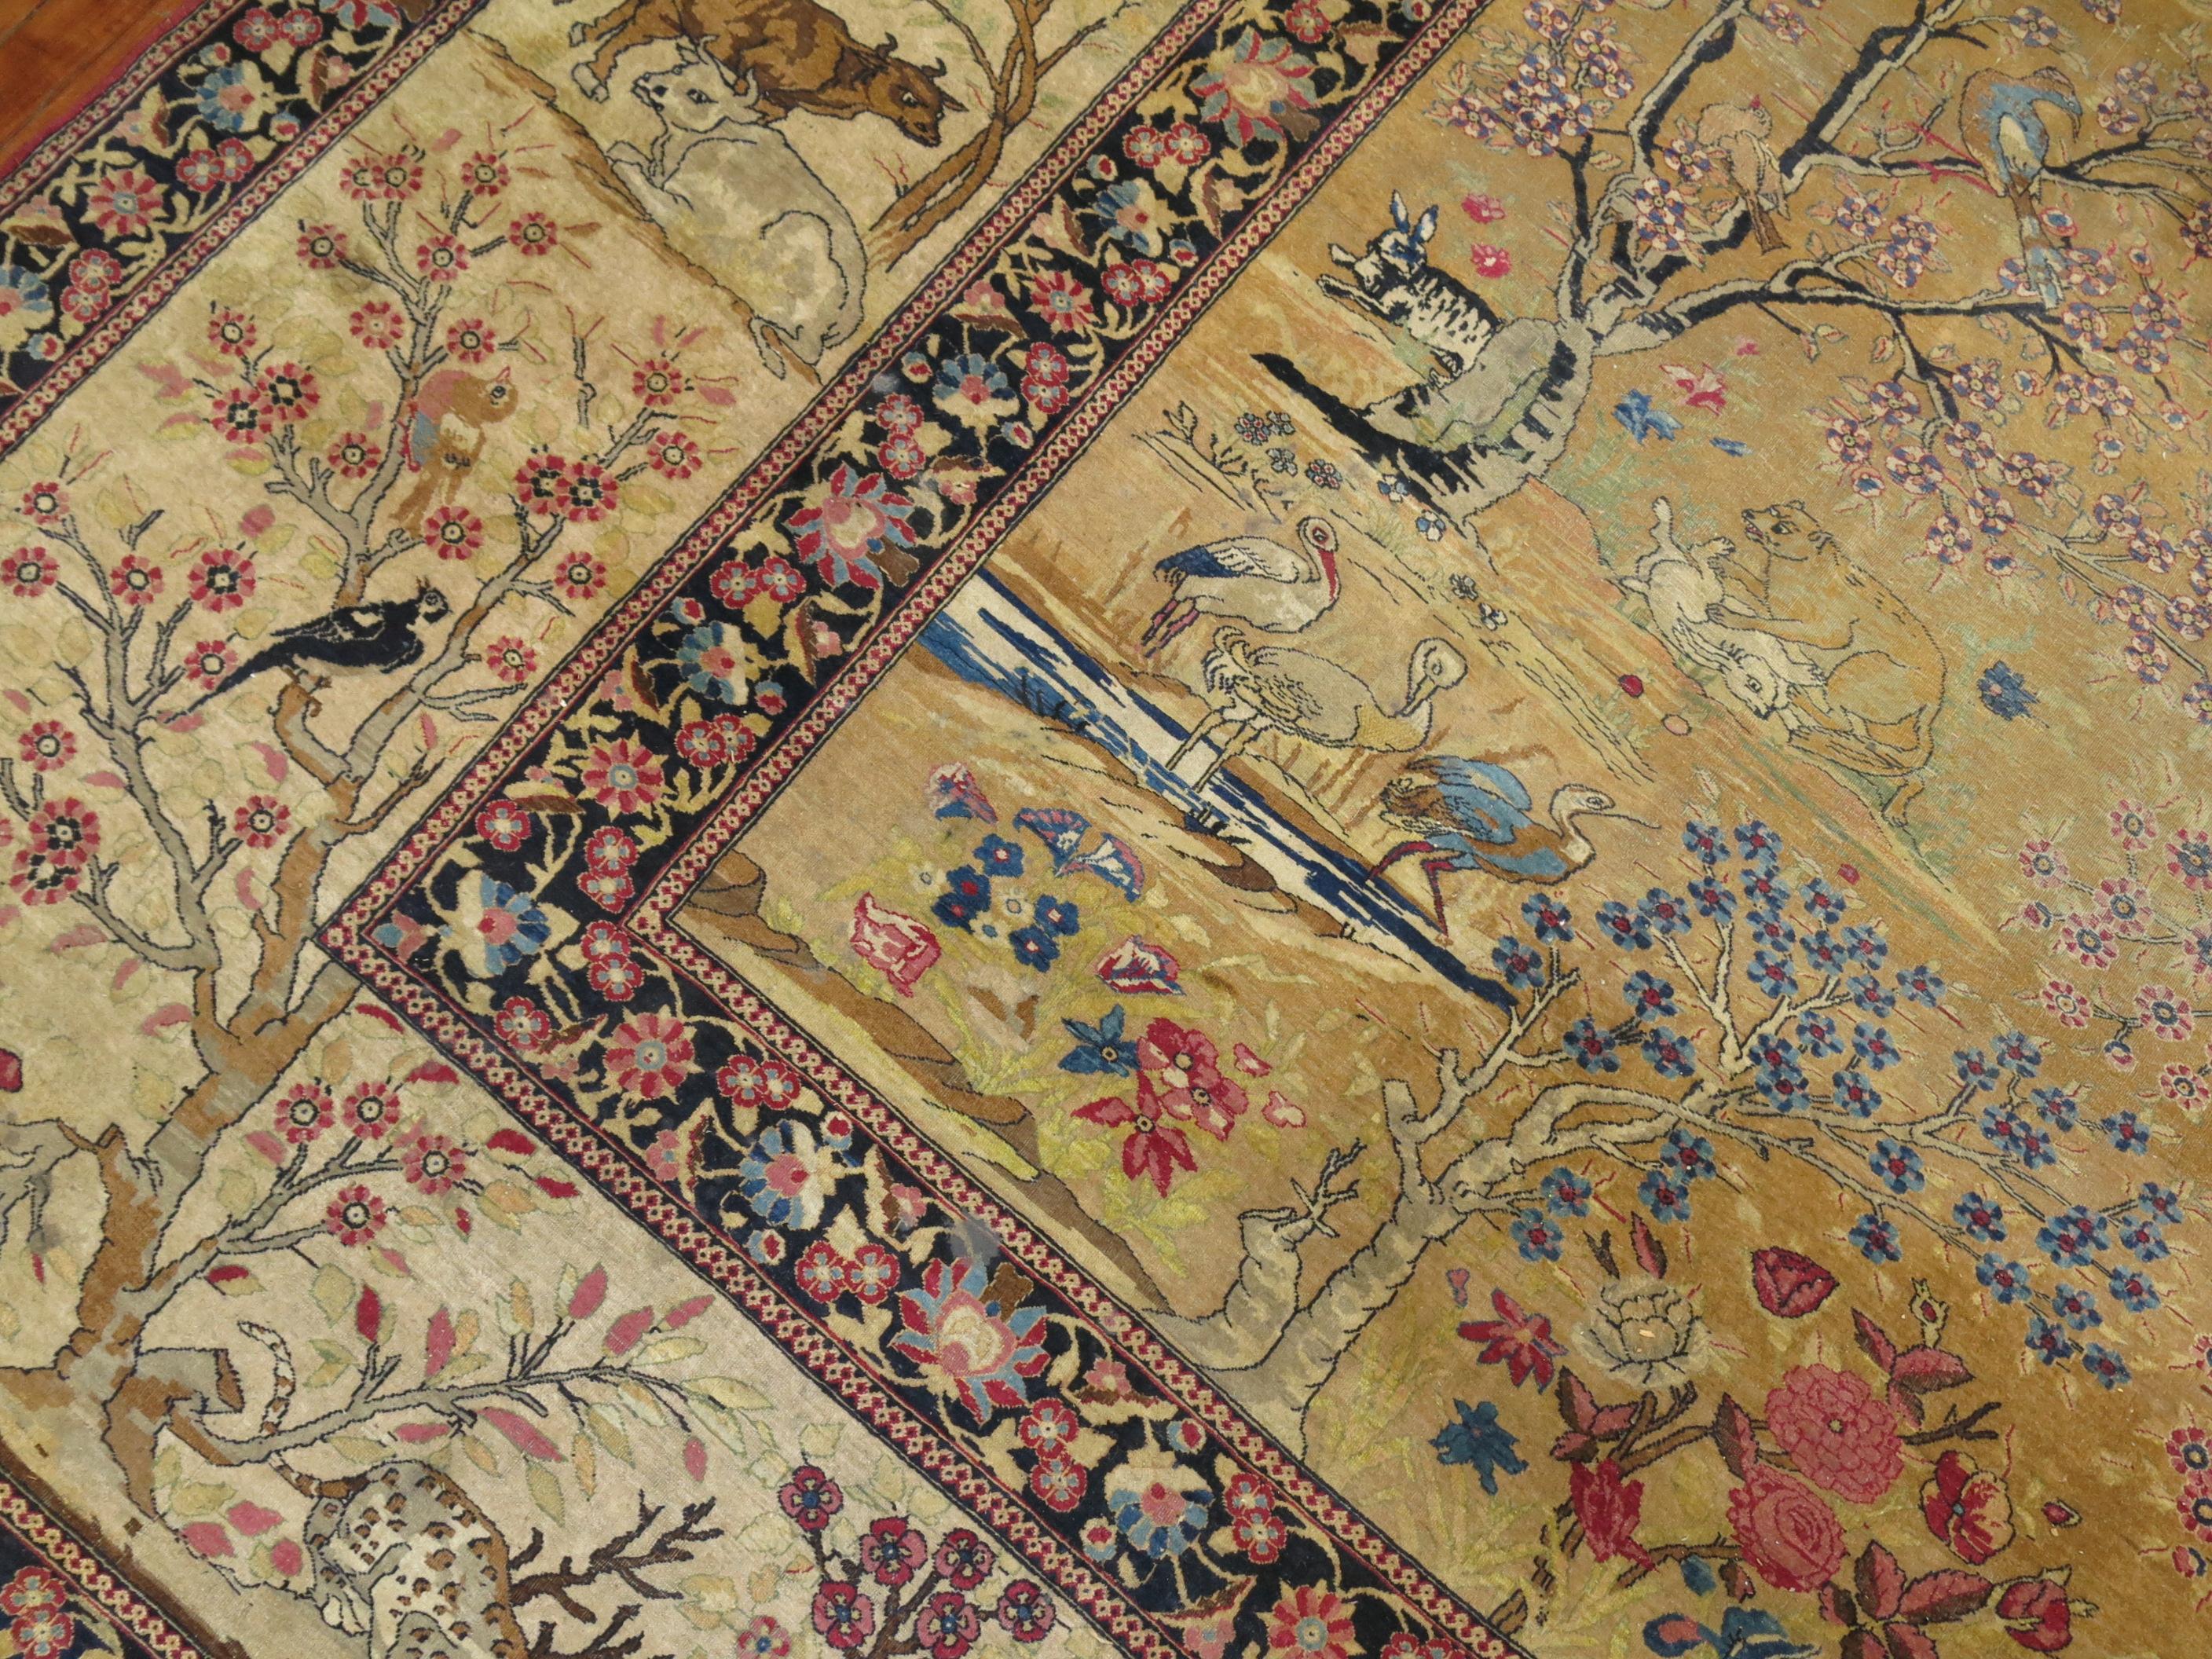 Persian Pictorial Animal Landscape Rug 1